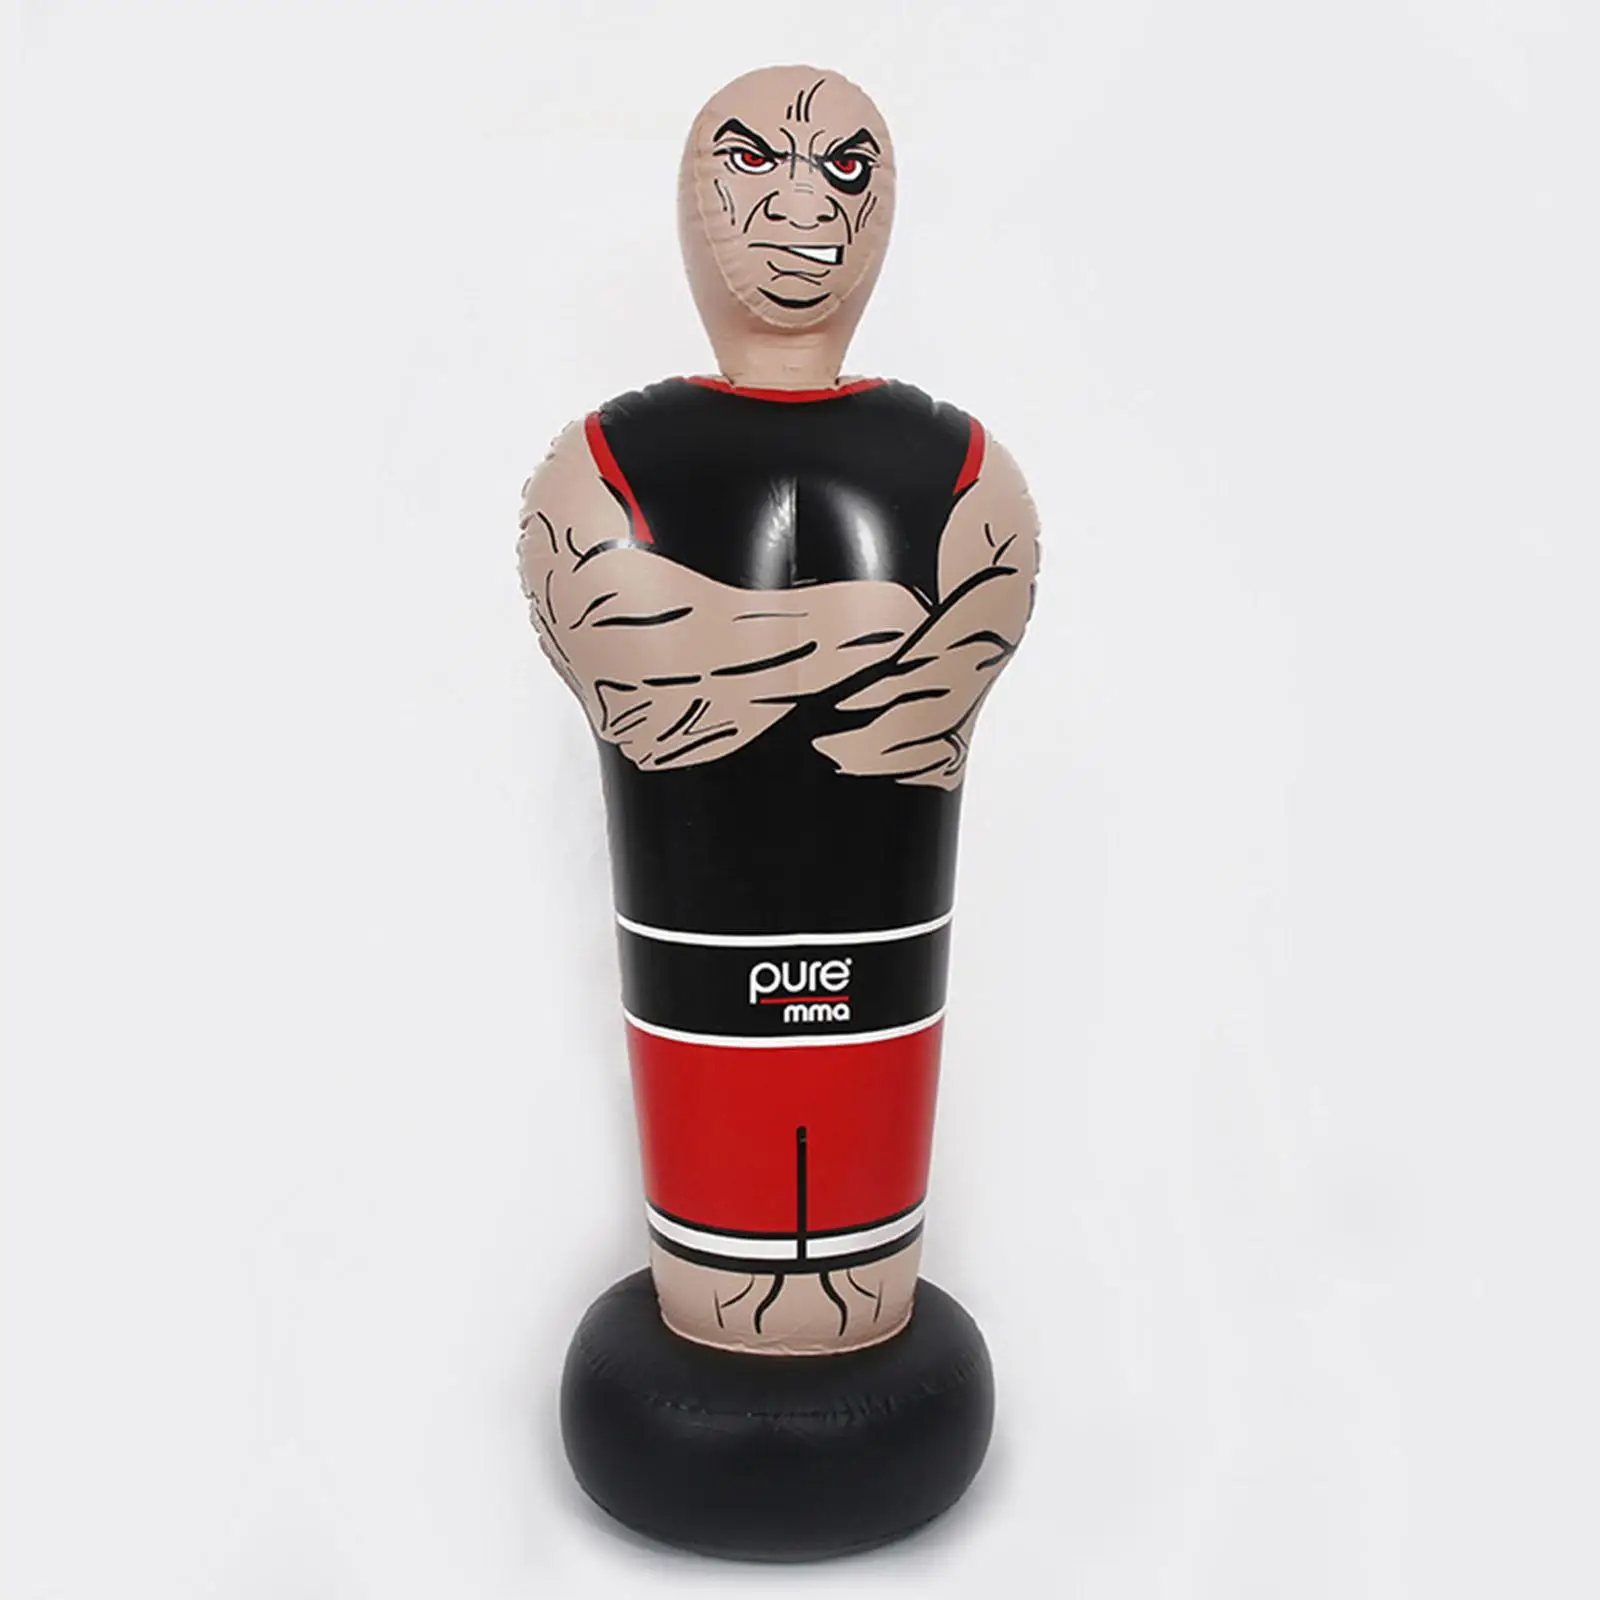 Inflatable Punching Bag Gifts for Boys Free Standing Toys Inflatable Boxing Bag for Kicking Punching Karate Fitness Martial Arts